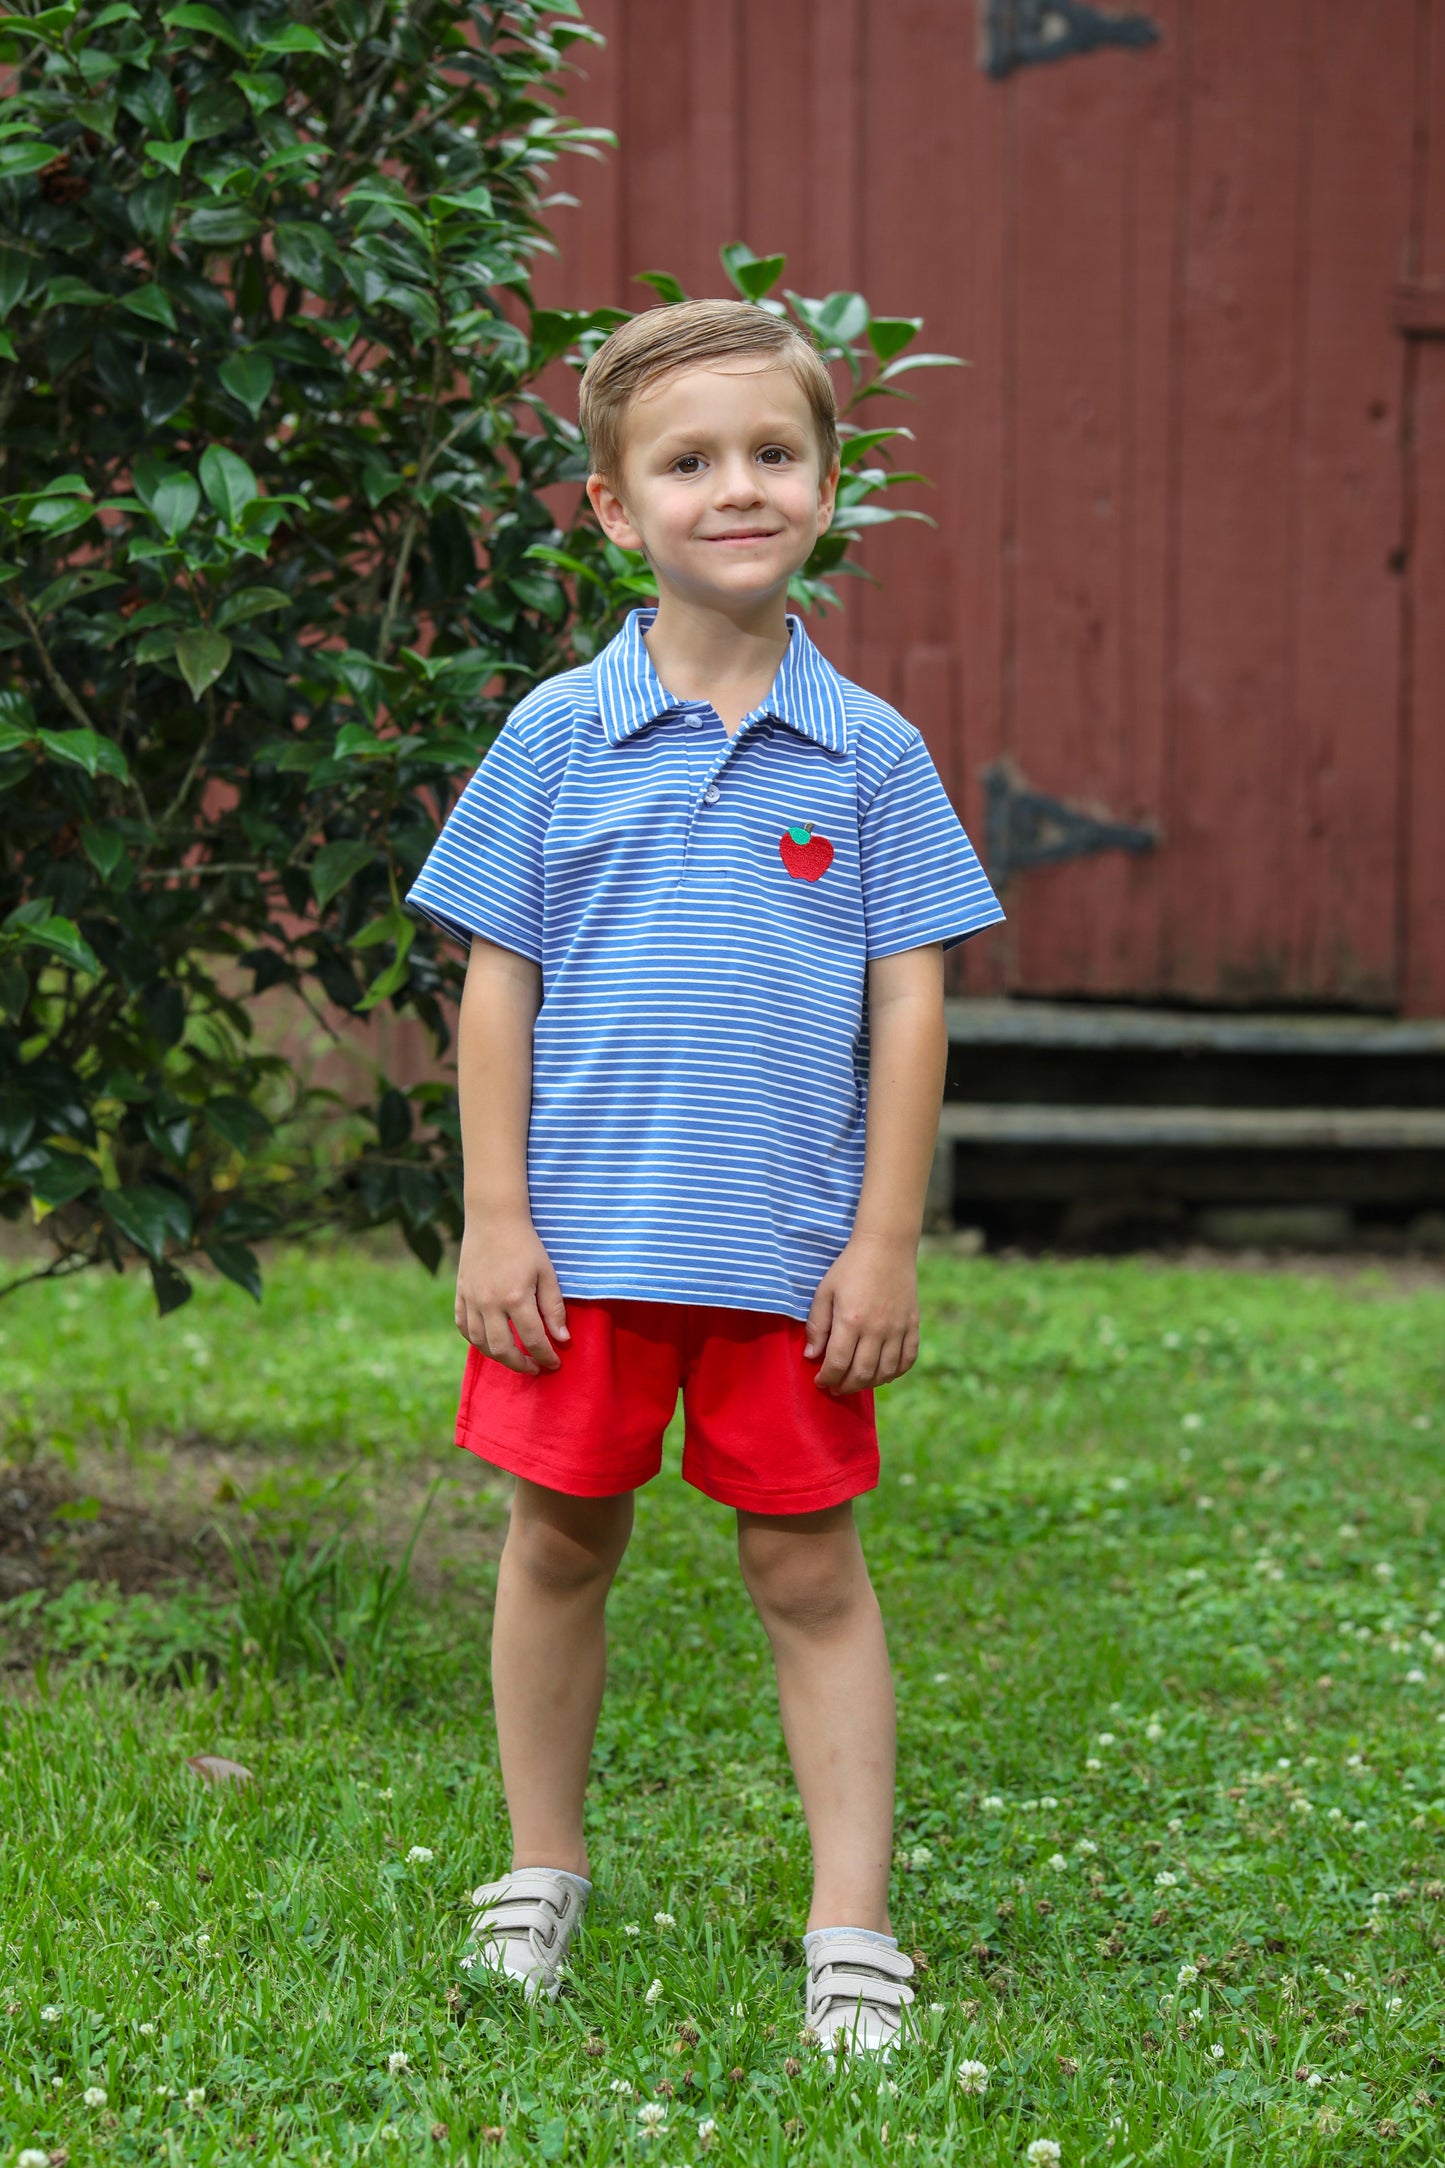 Back to School Polo